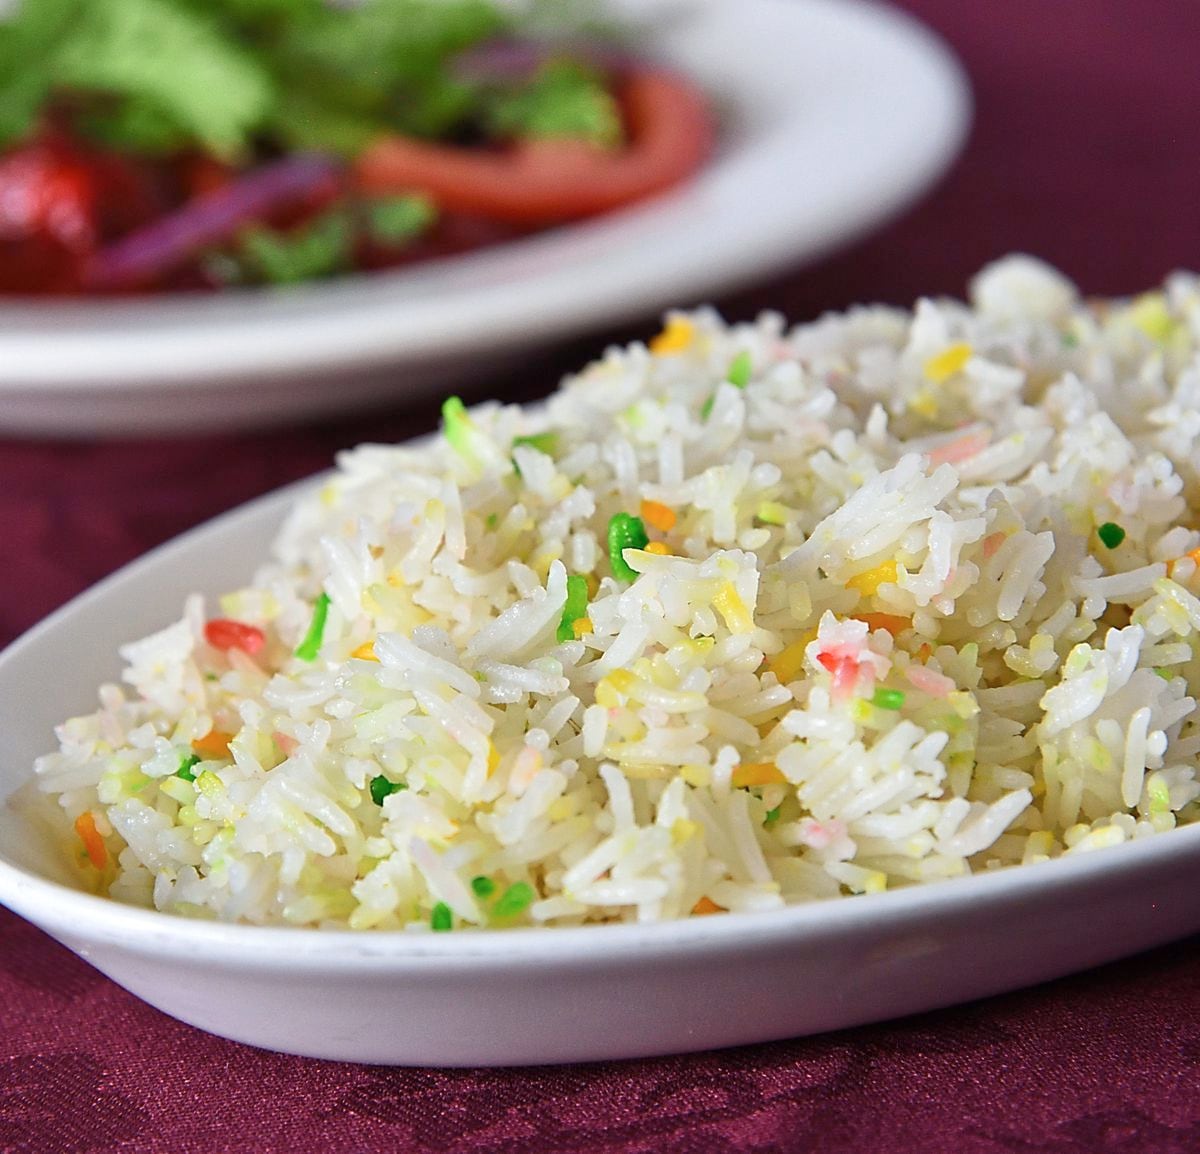 A side dish of pilau rice